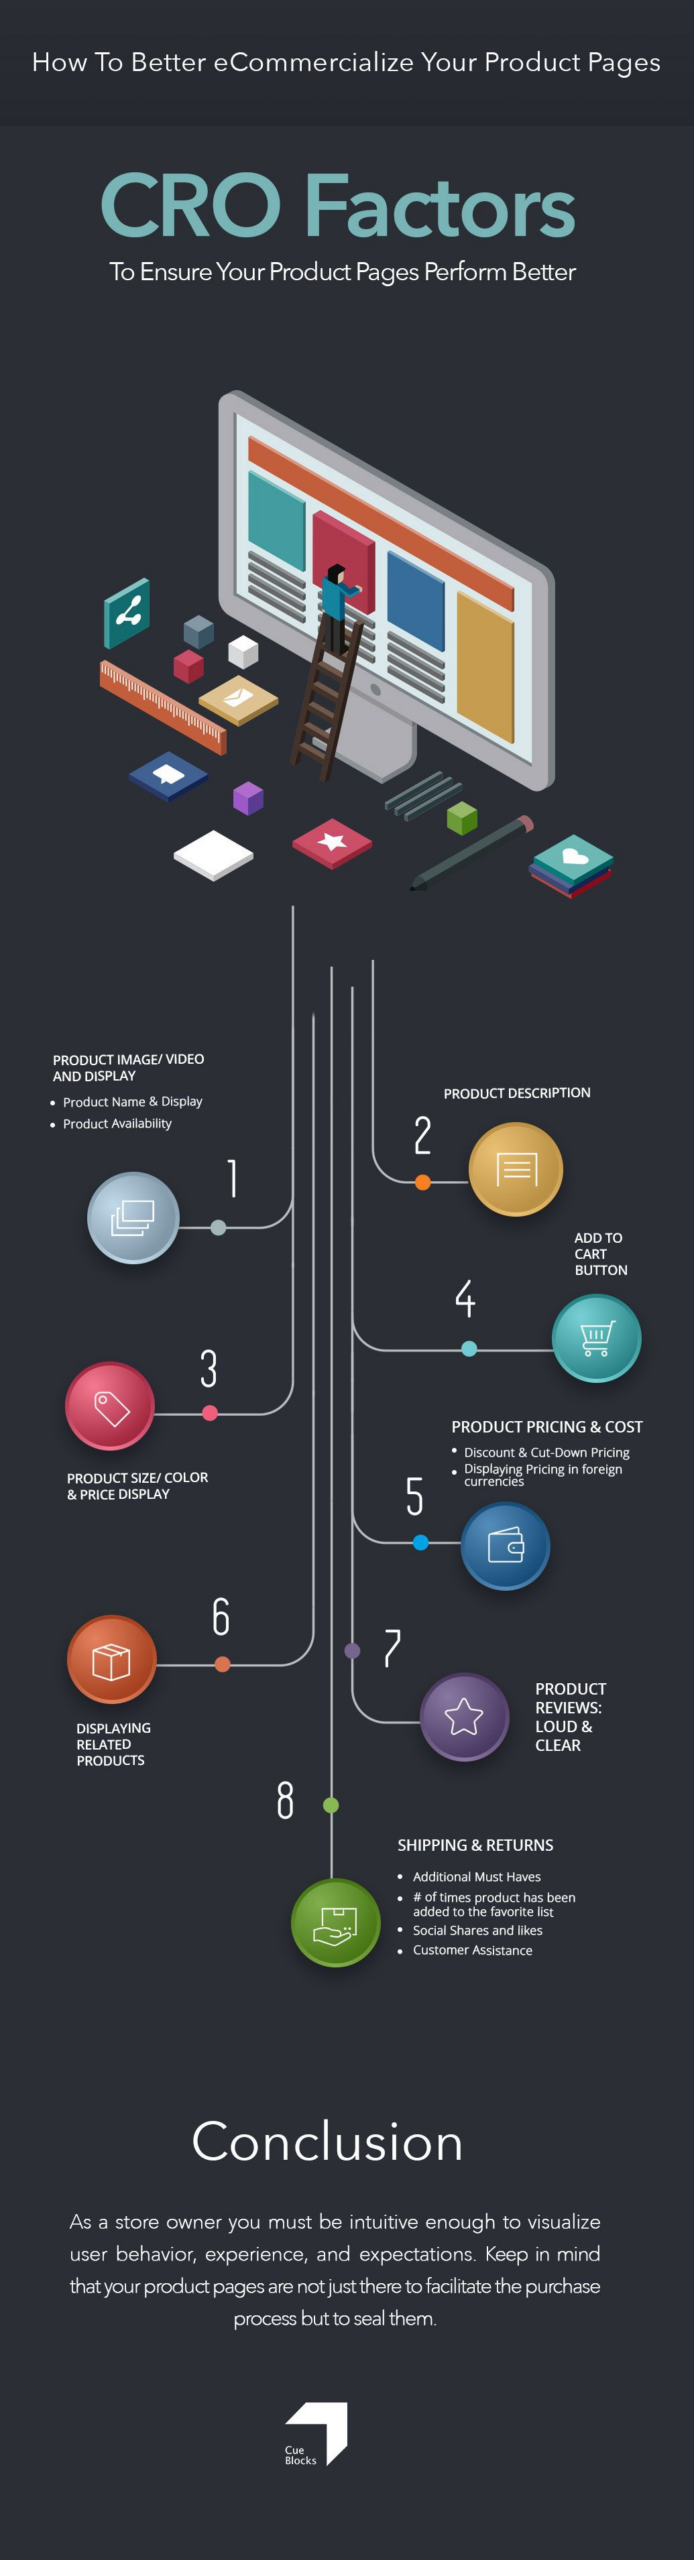 Product Pages -CRO Infographic